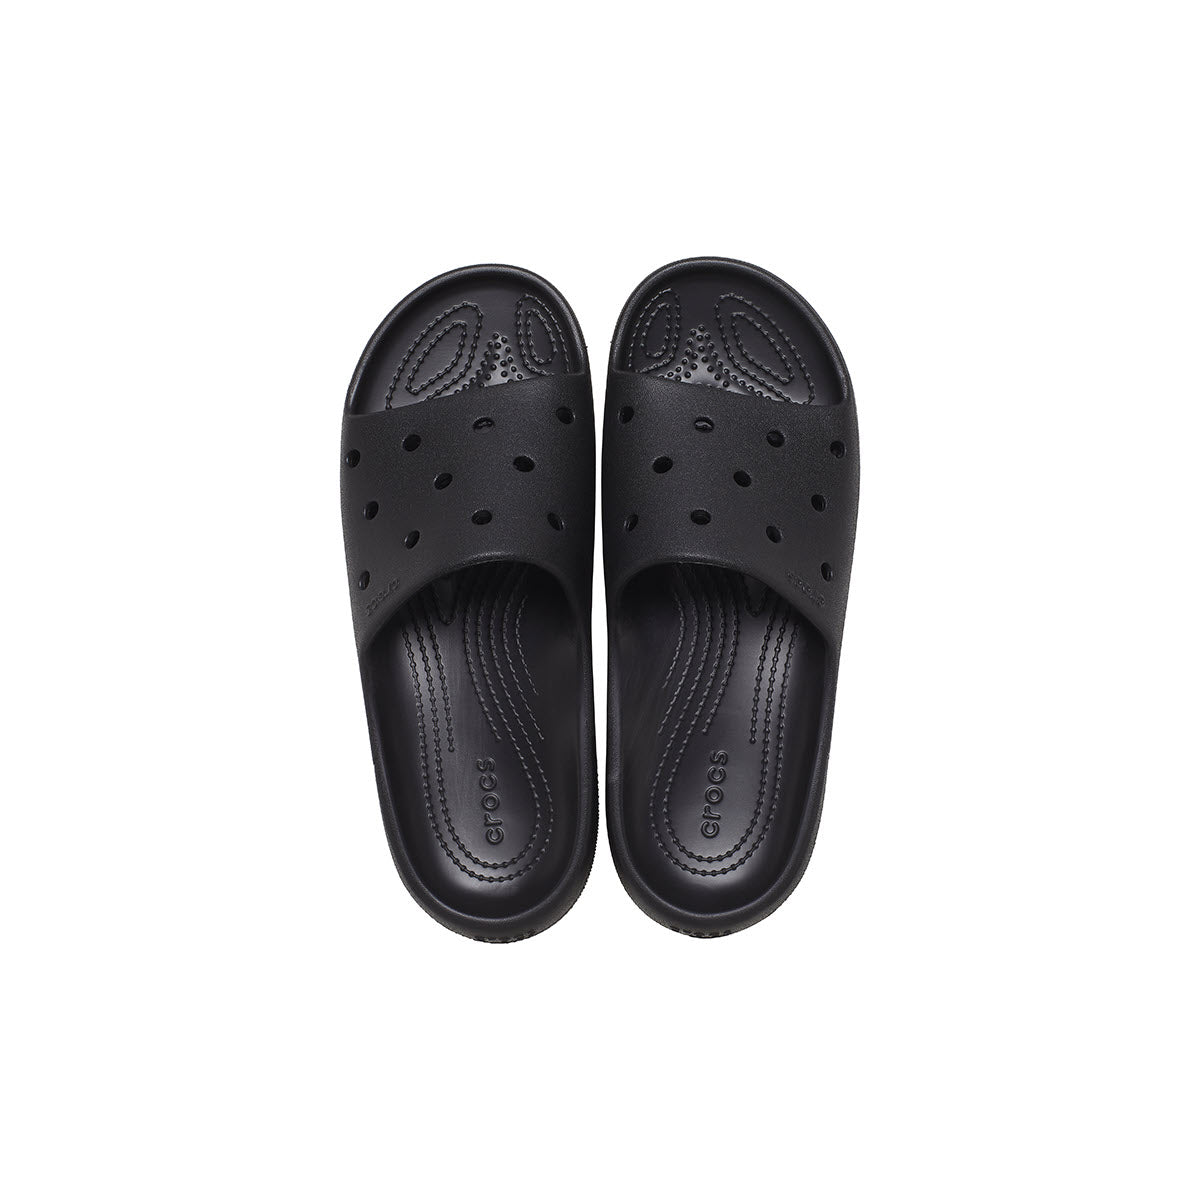 A pair of black Crocs Classic Croc Slide V2 Sandals from the Crocs Collection displayed on a white background.